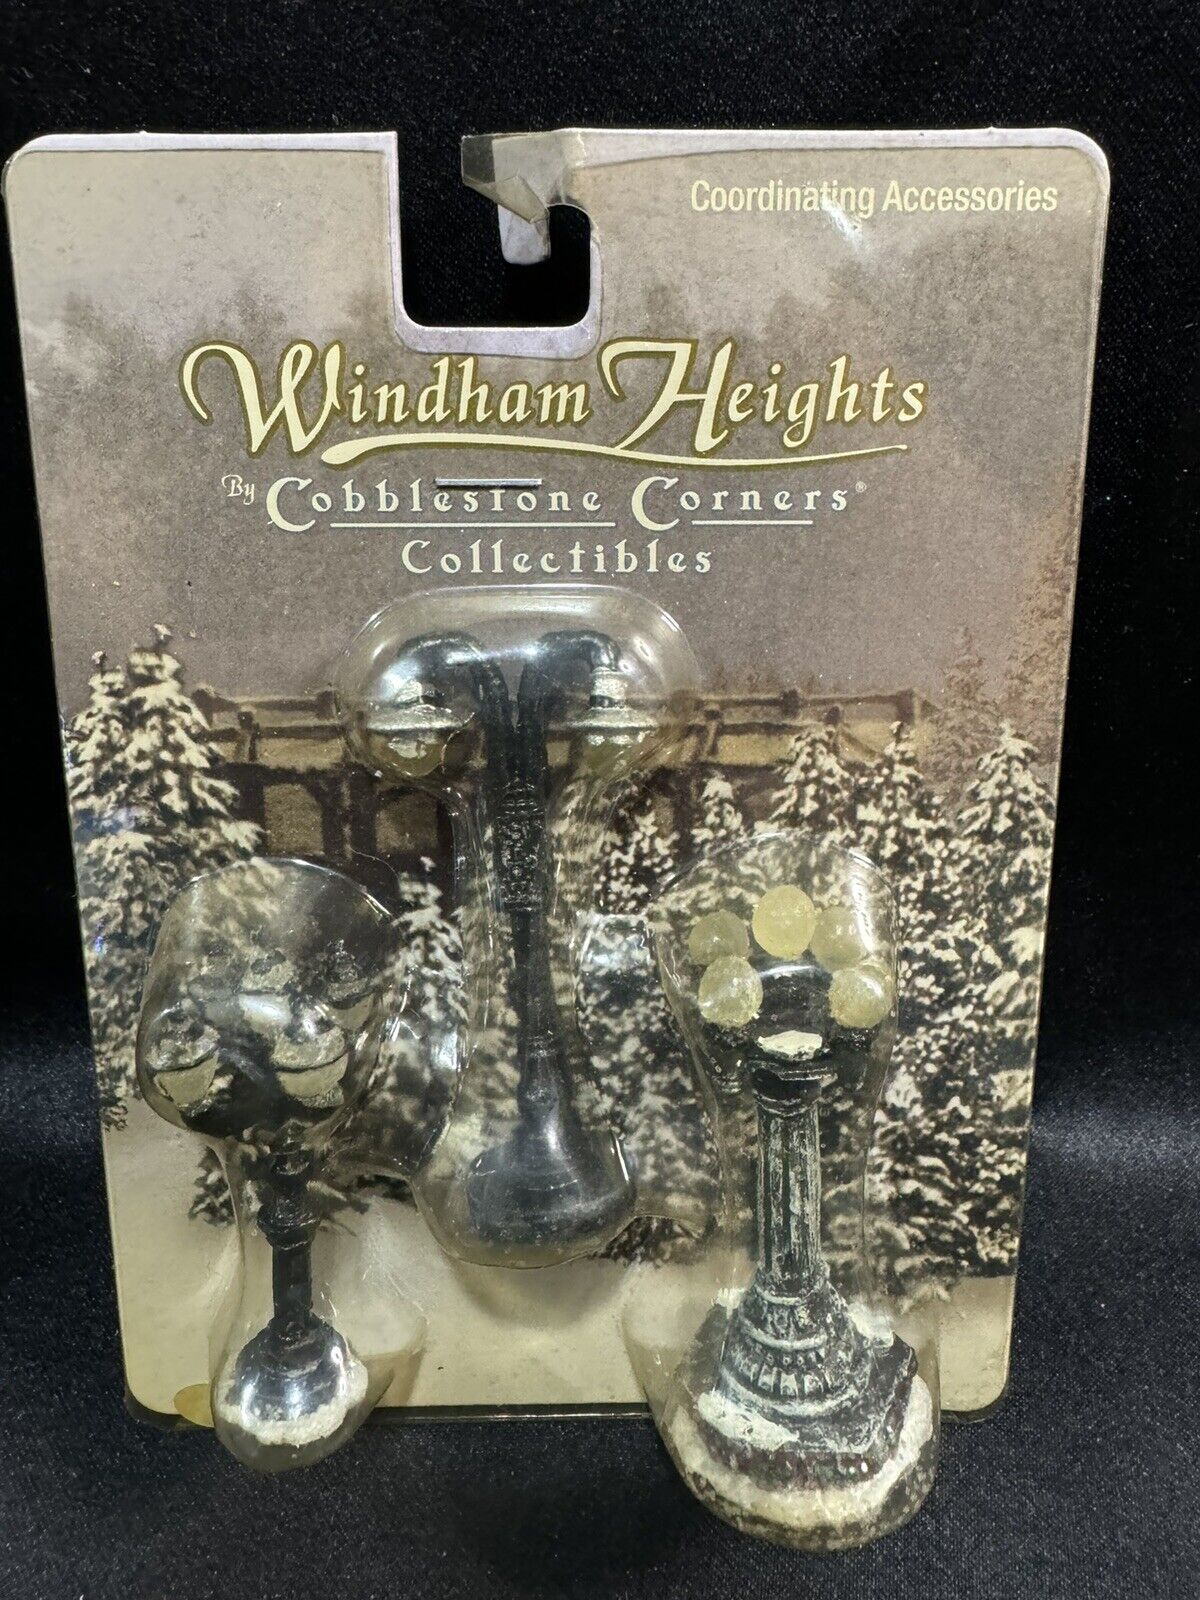 Windham Heights Cobblestone Corners Collectibles Accessories Light Posts